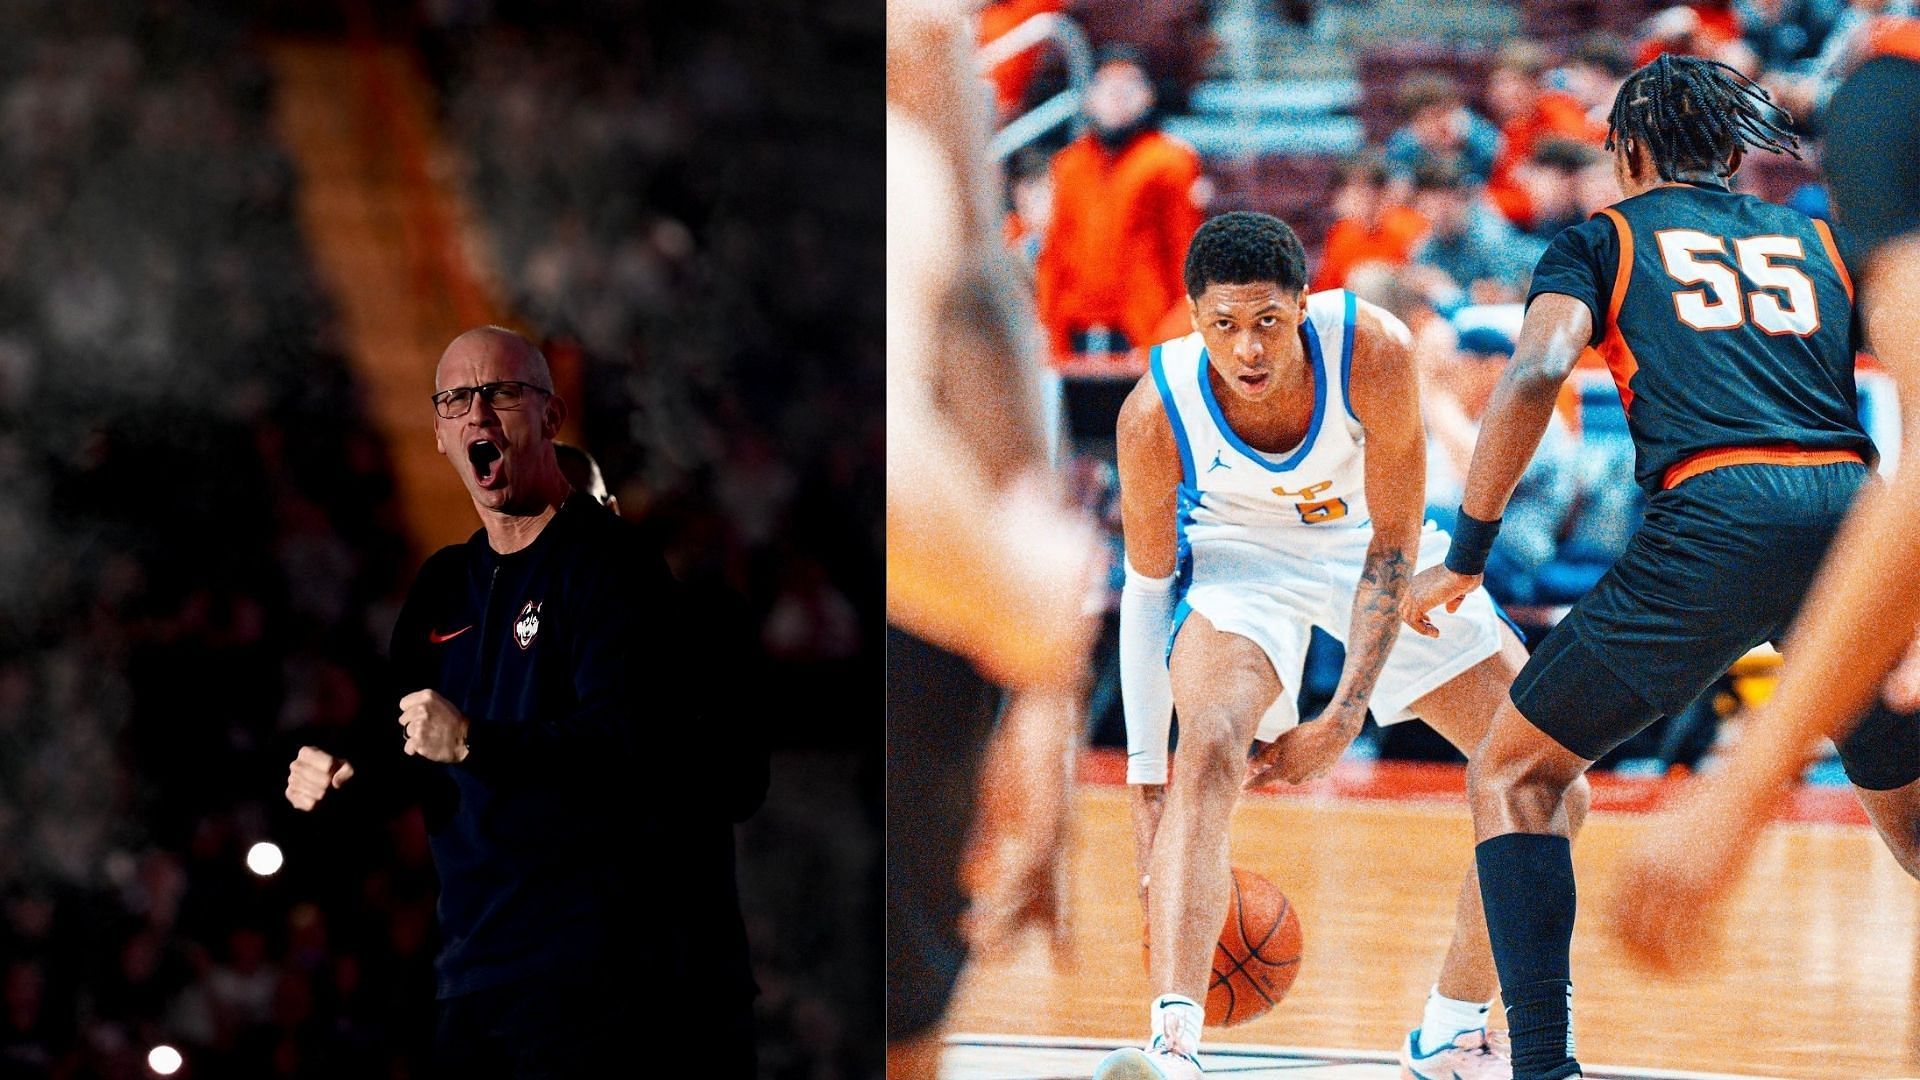 Meleek Thomas has reacted to Dan Hurley staying at UConn (Picture Sources: @dhurley15, @ThomasMeleek (X))